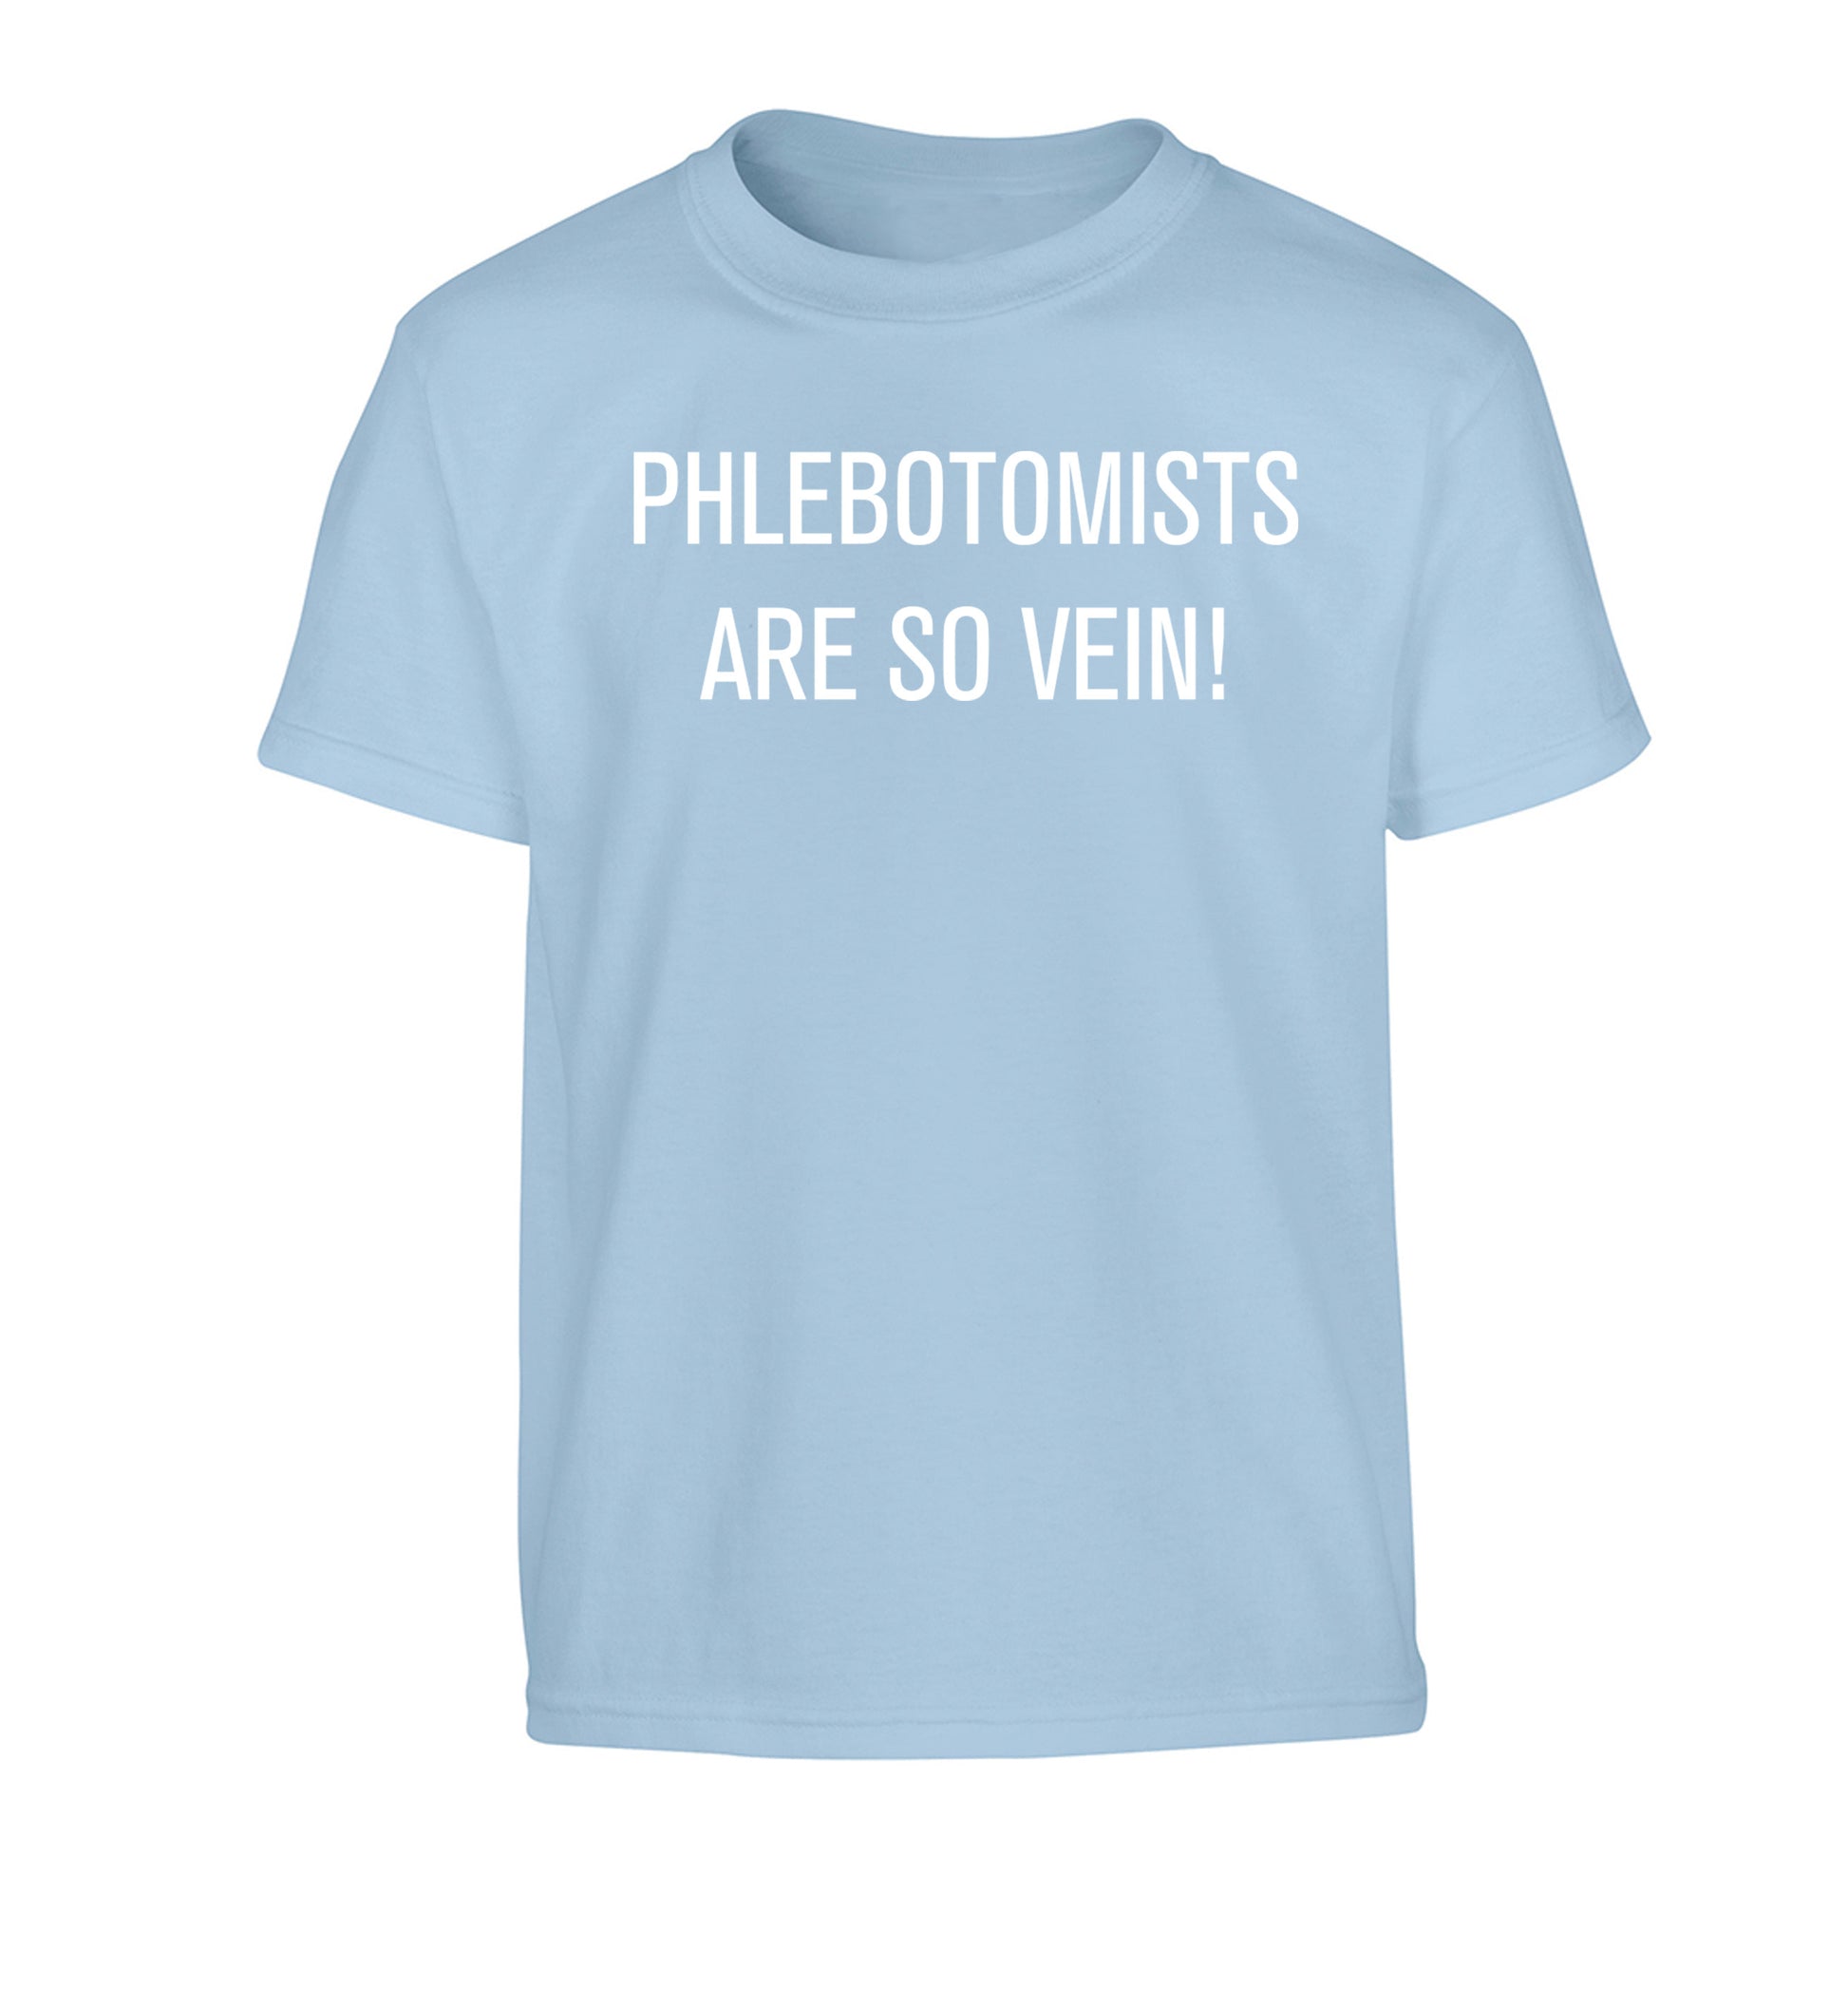 Phlebotomists are so vein! Children's light blue Tshirt 12-14 Years